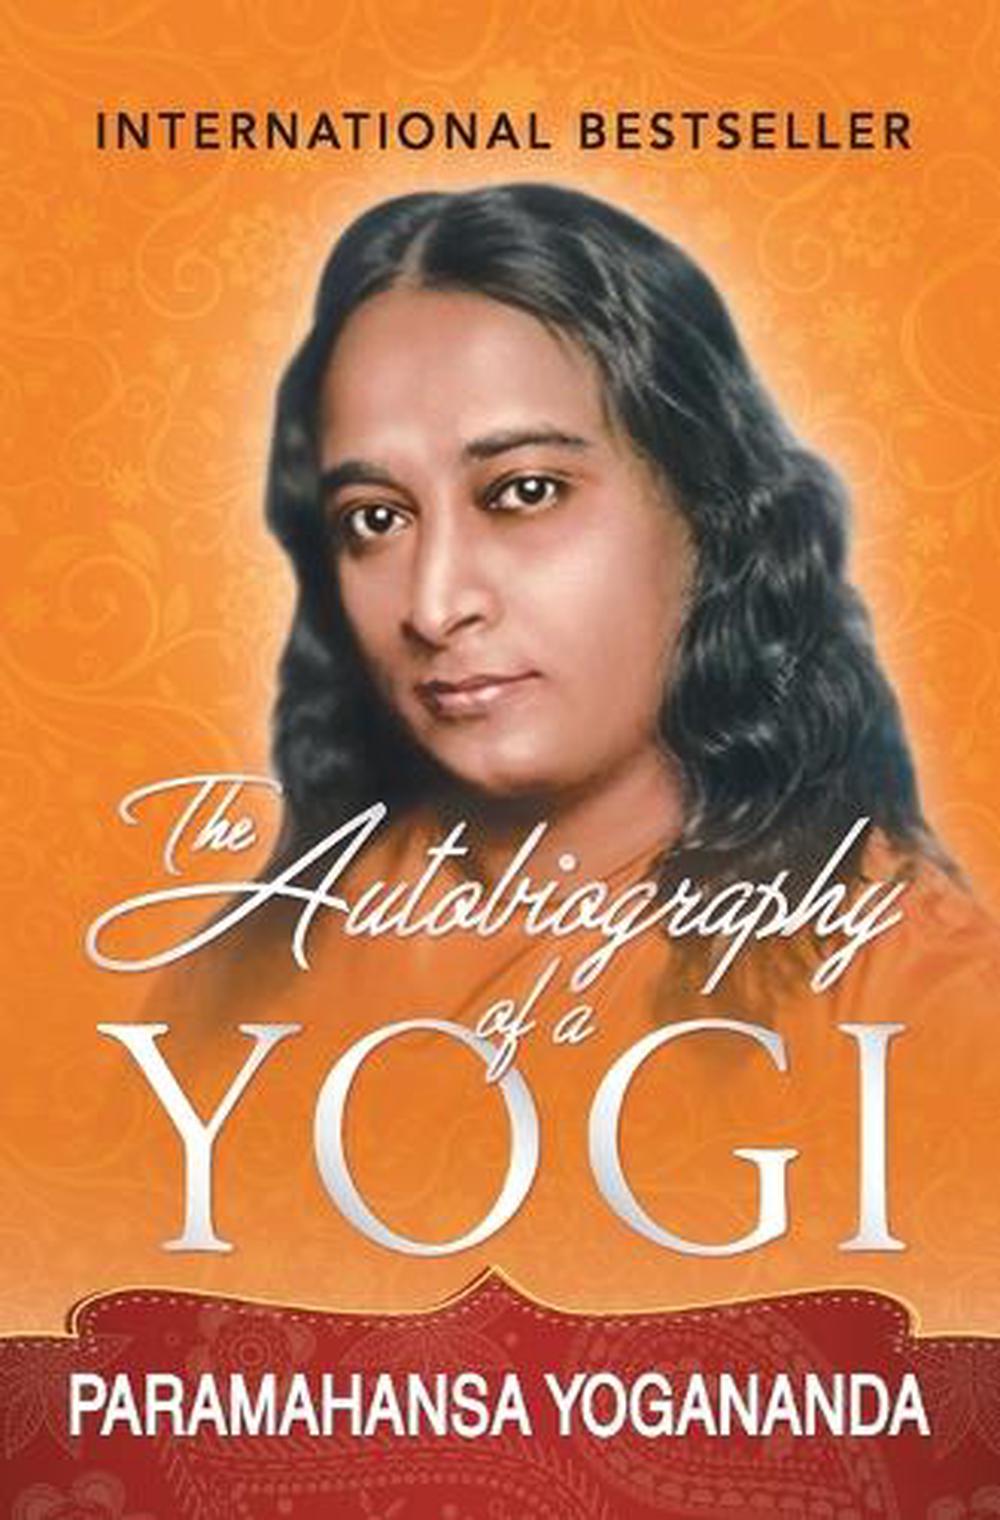 autobiography of a yogi book in english